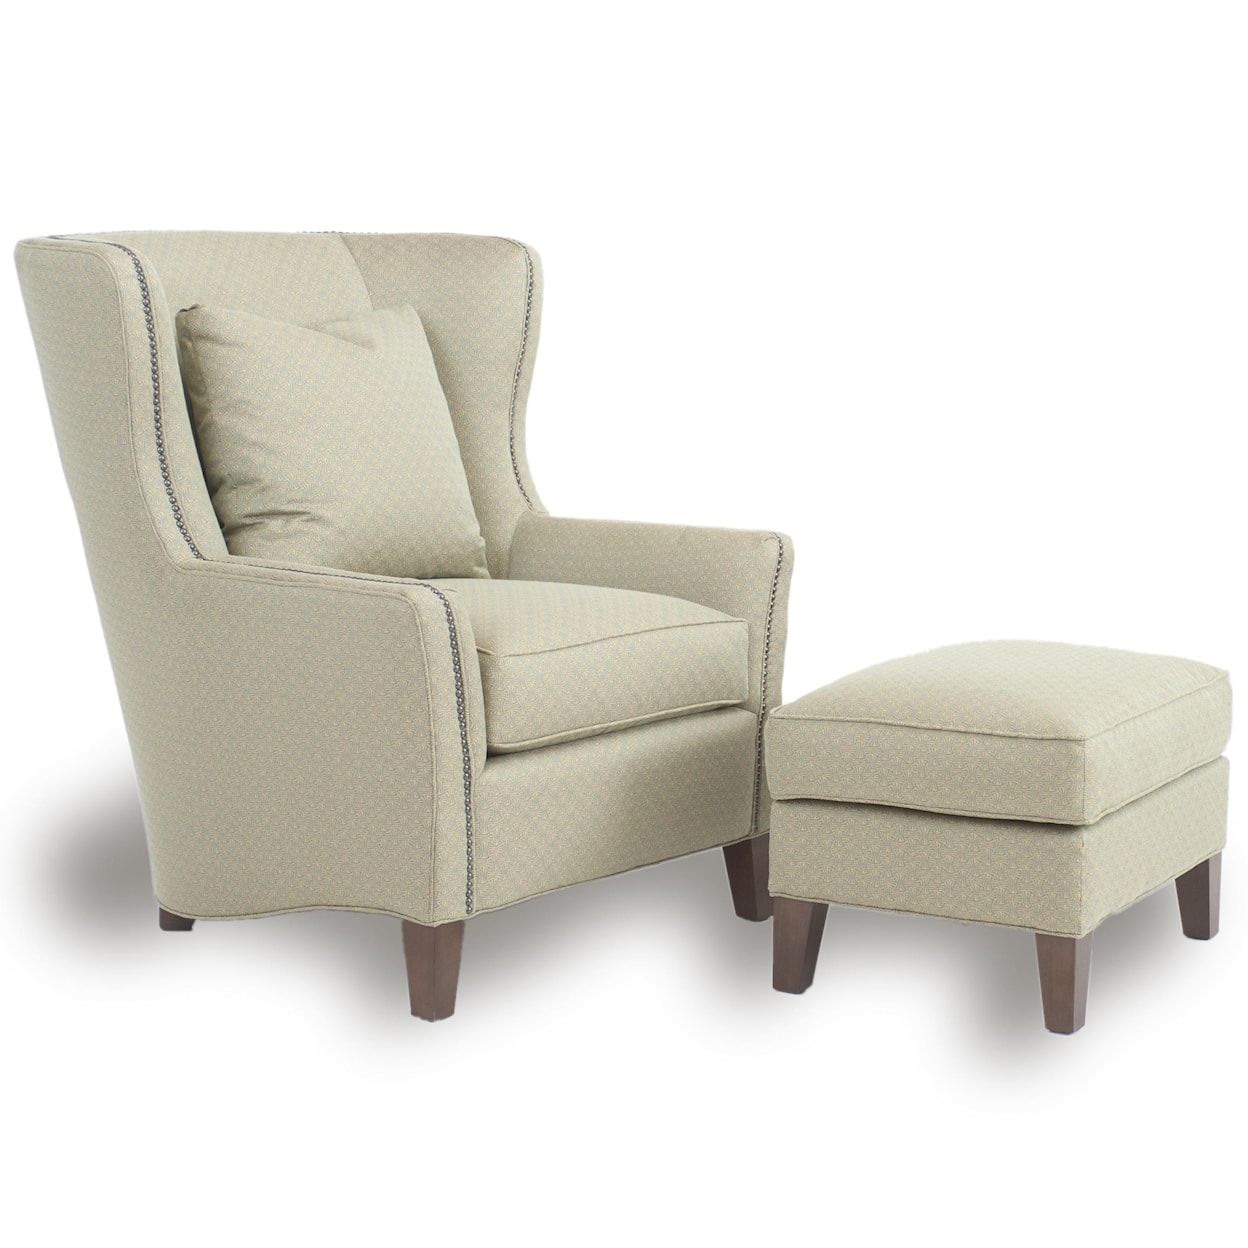 Kirkwood Accent Chairs and Ottomans SB Wingback Chair and Ottoman